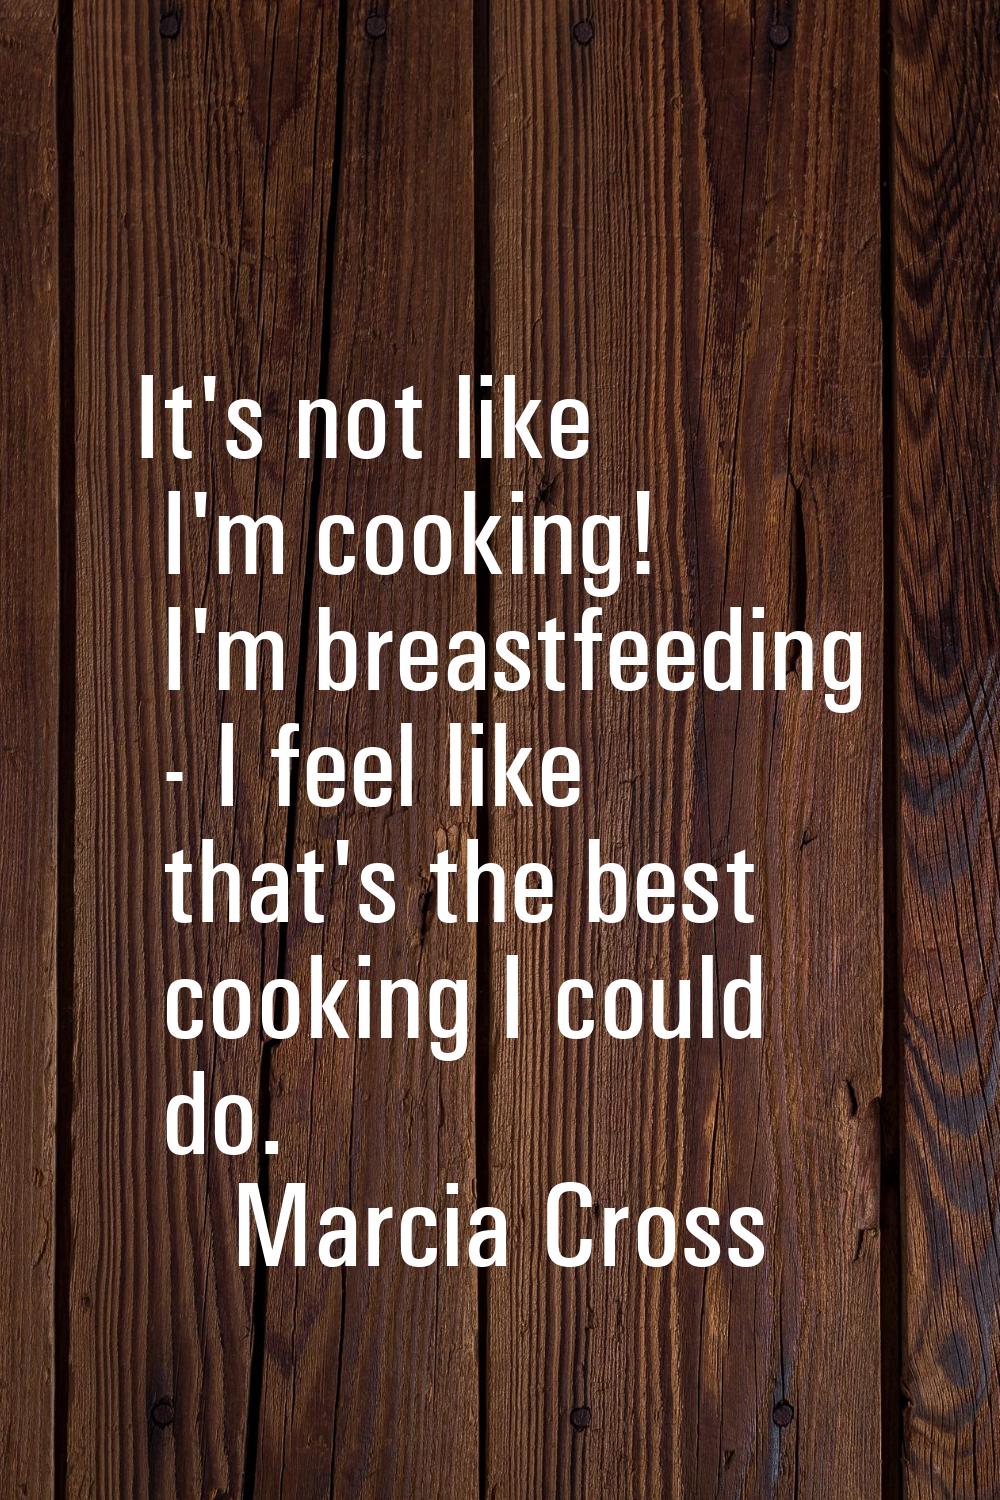 It's not like I'm cooking! I'm breastfeeding - I feel like that's the best cooking I could do.